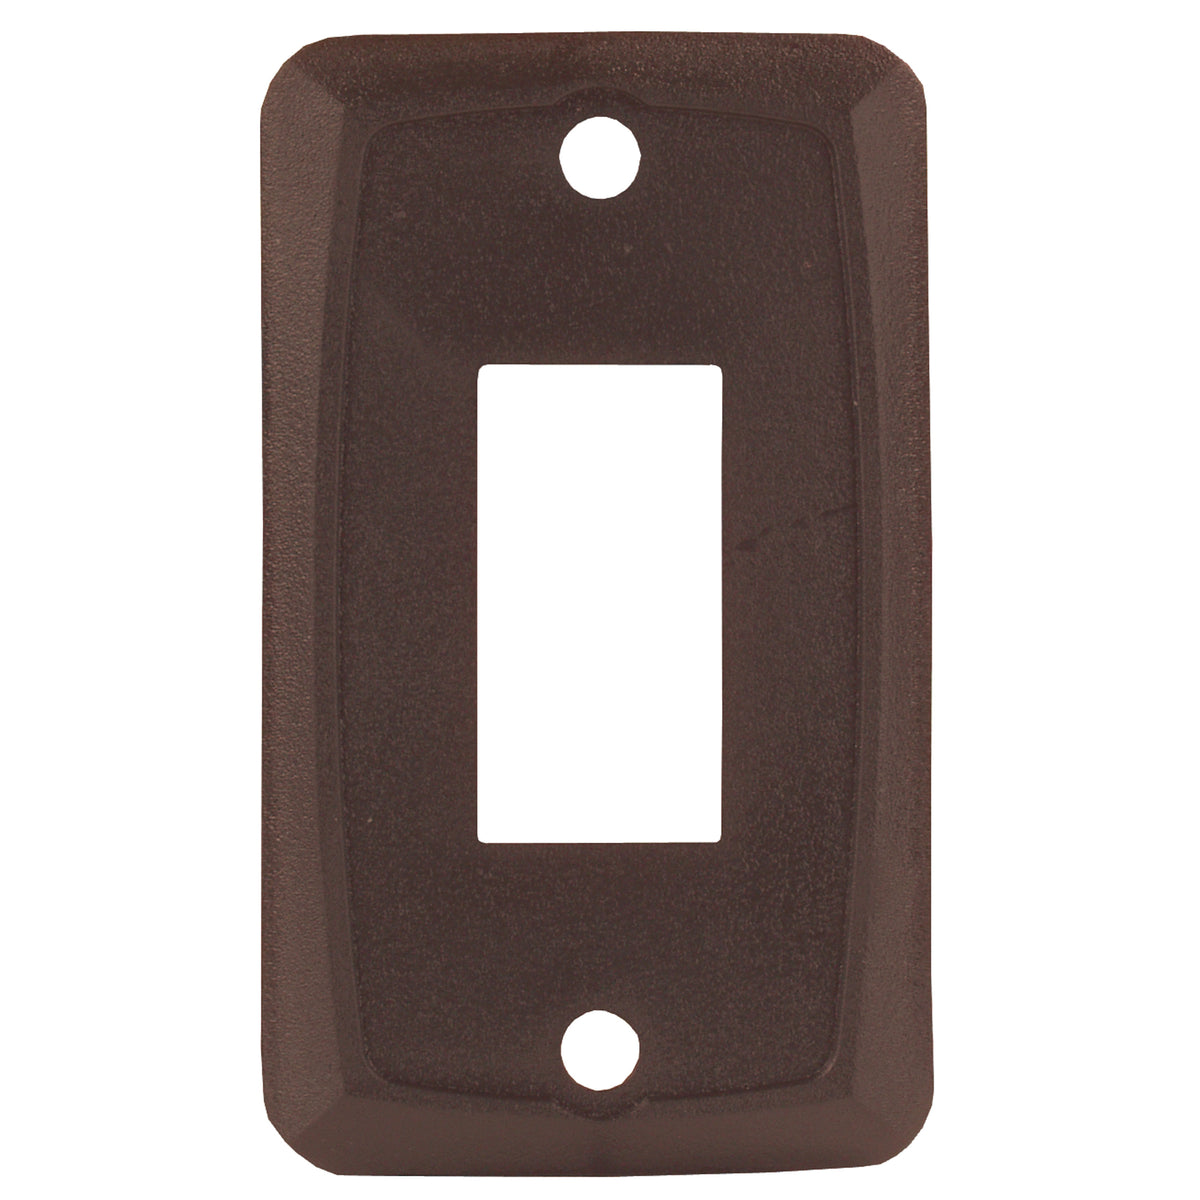 JR Products 12865 Single Switch Face Plate - Brown